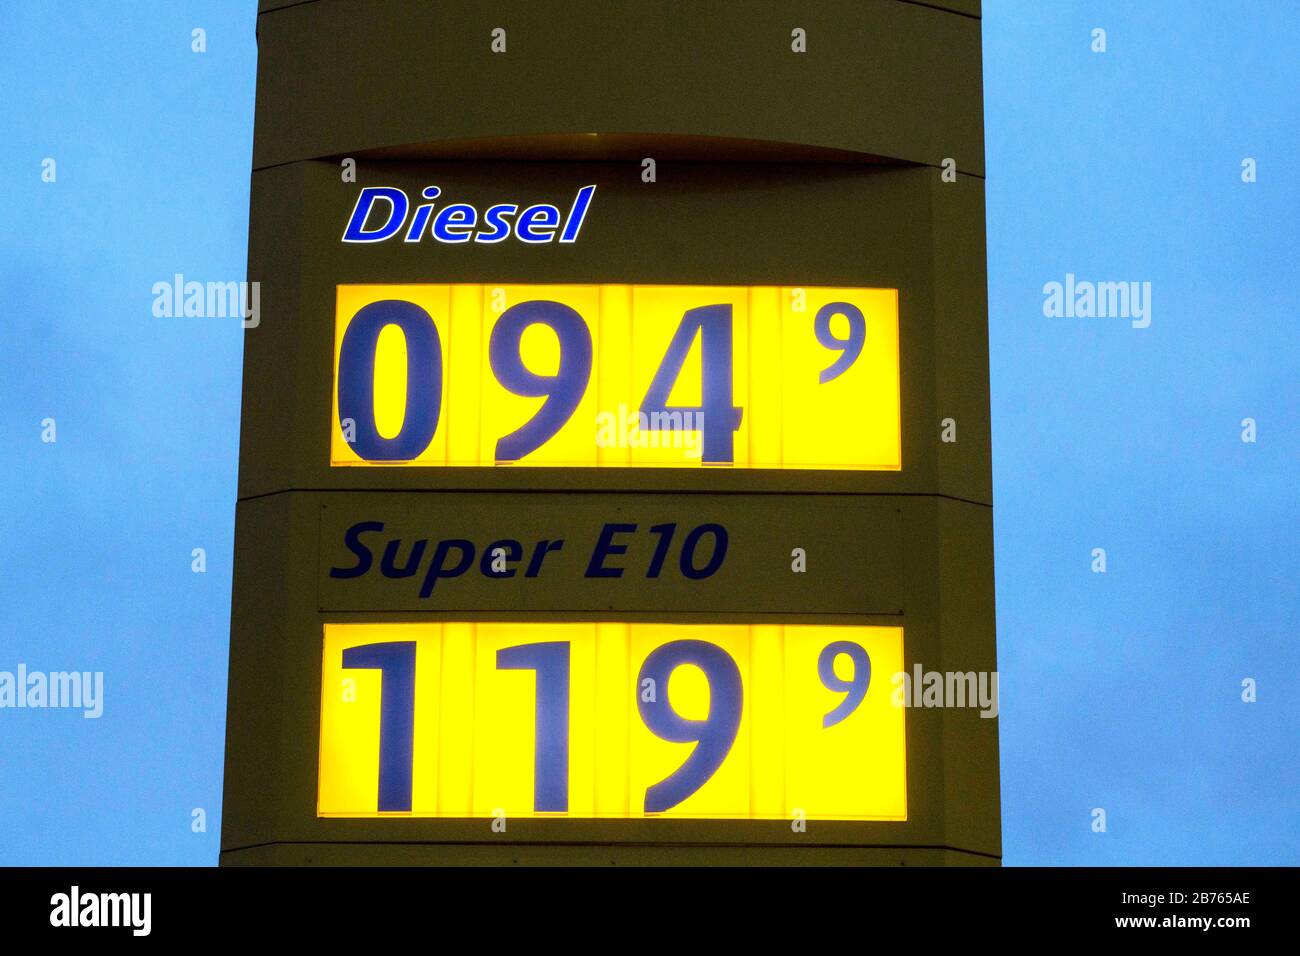 94.8 cents will be charged for one litre of diesel at a filling station in Berlin on 18.12.2015. [automated translation] Stock Photo